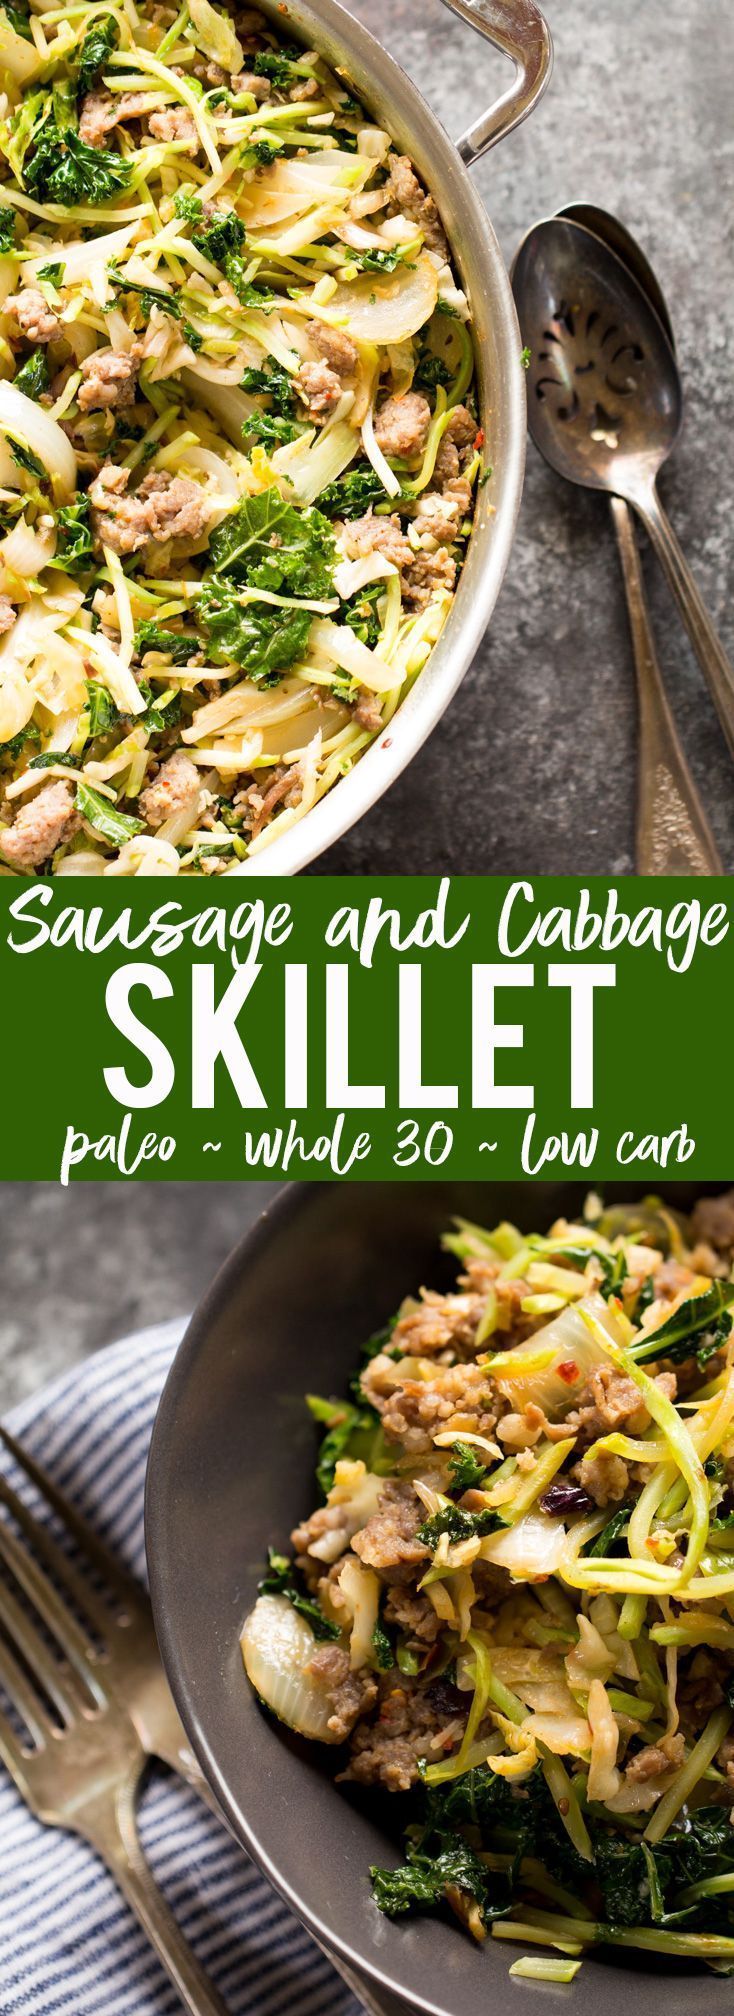 Sausage and Cabbage Skillet -   24 green cabbage recipes
 ideas